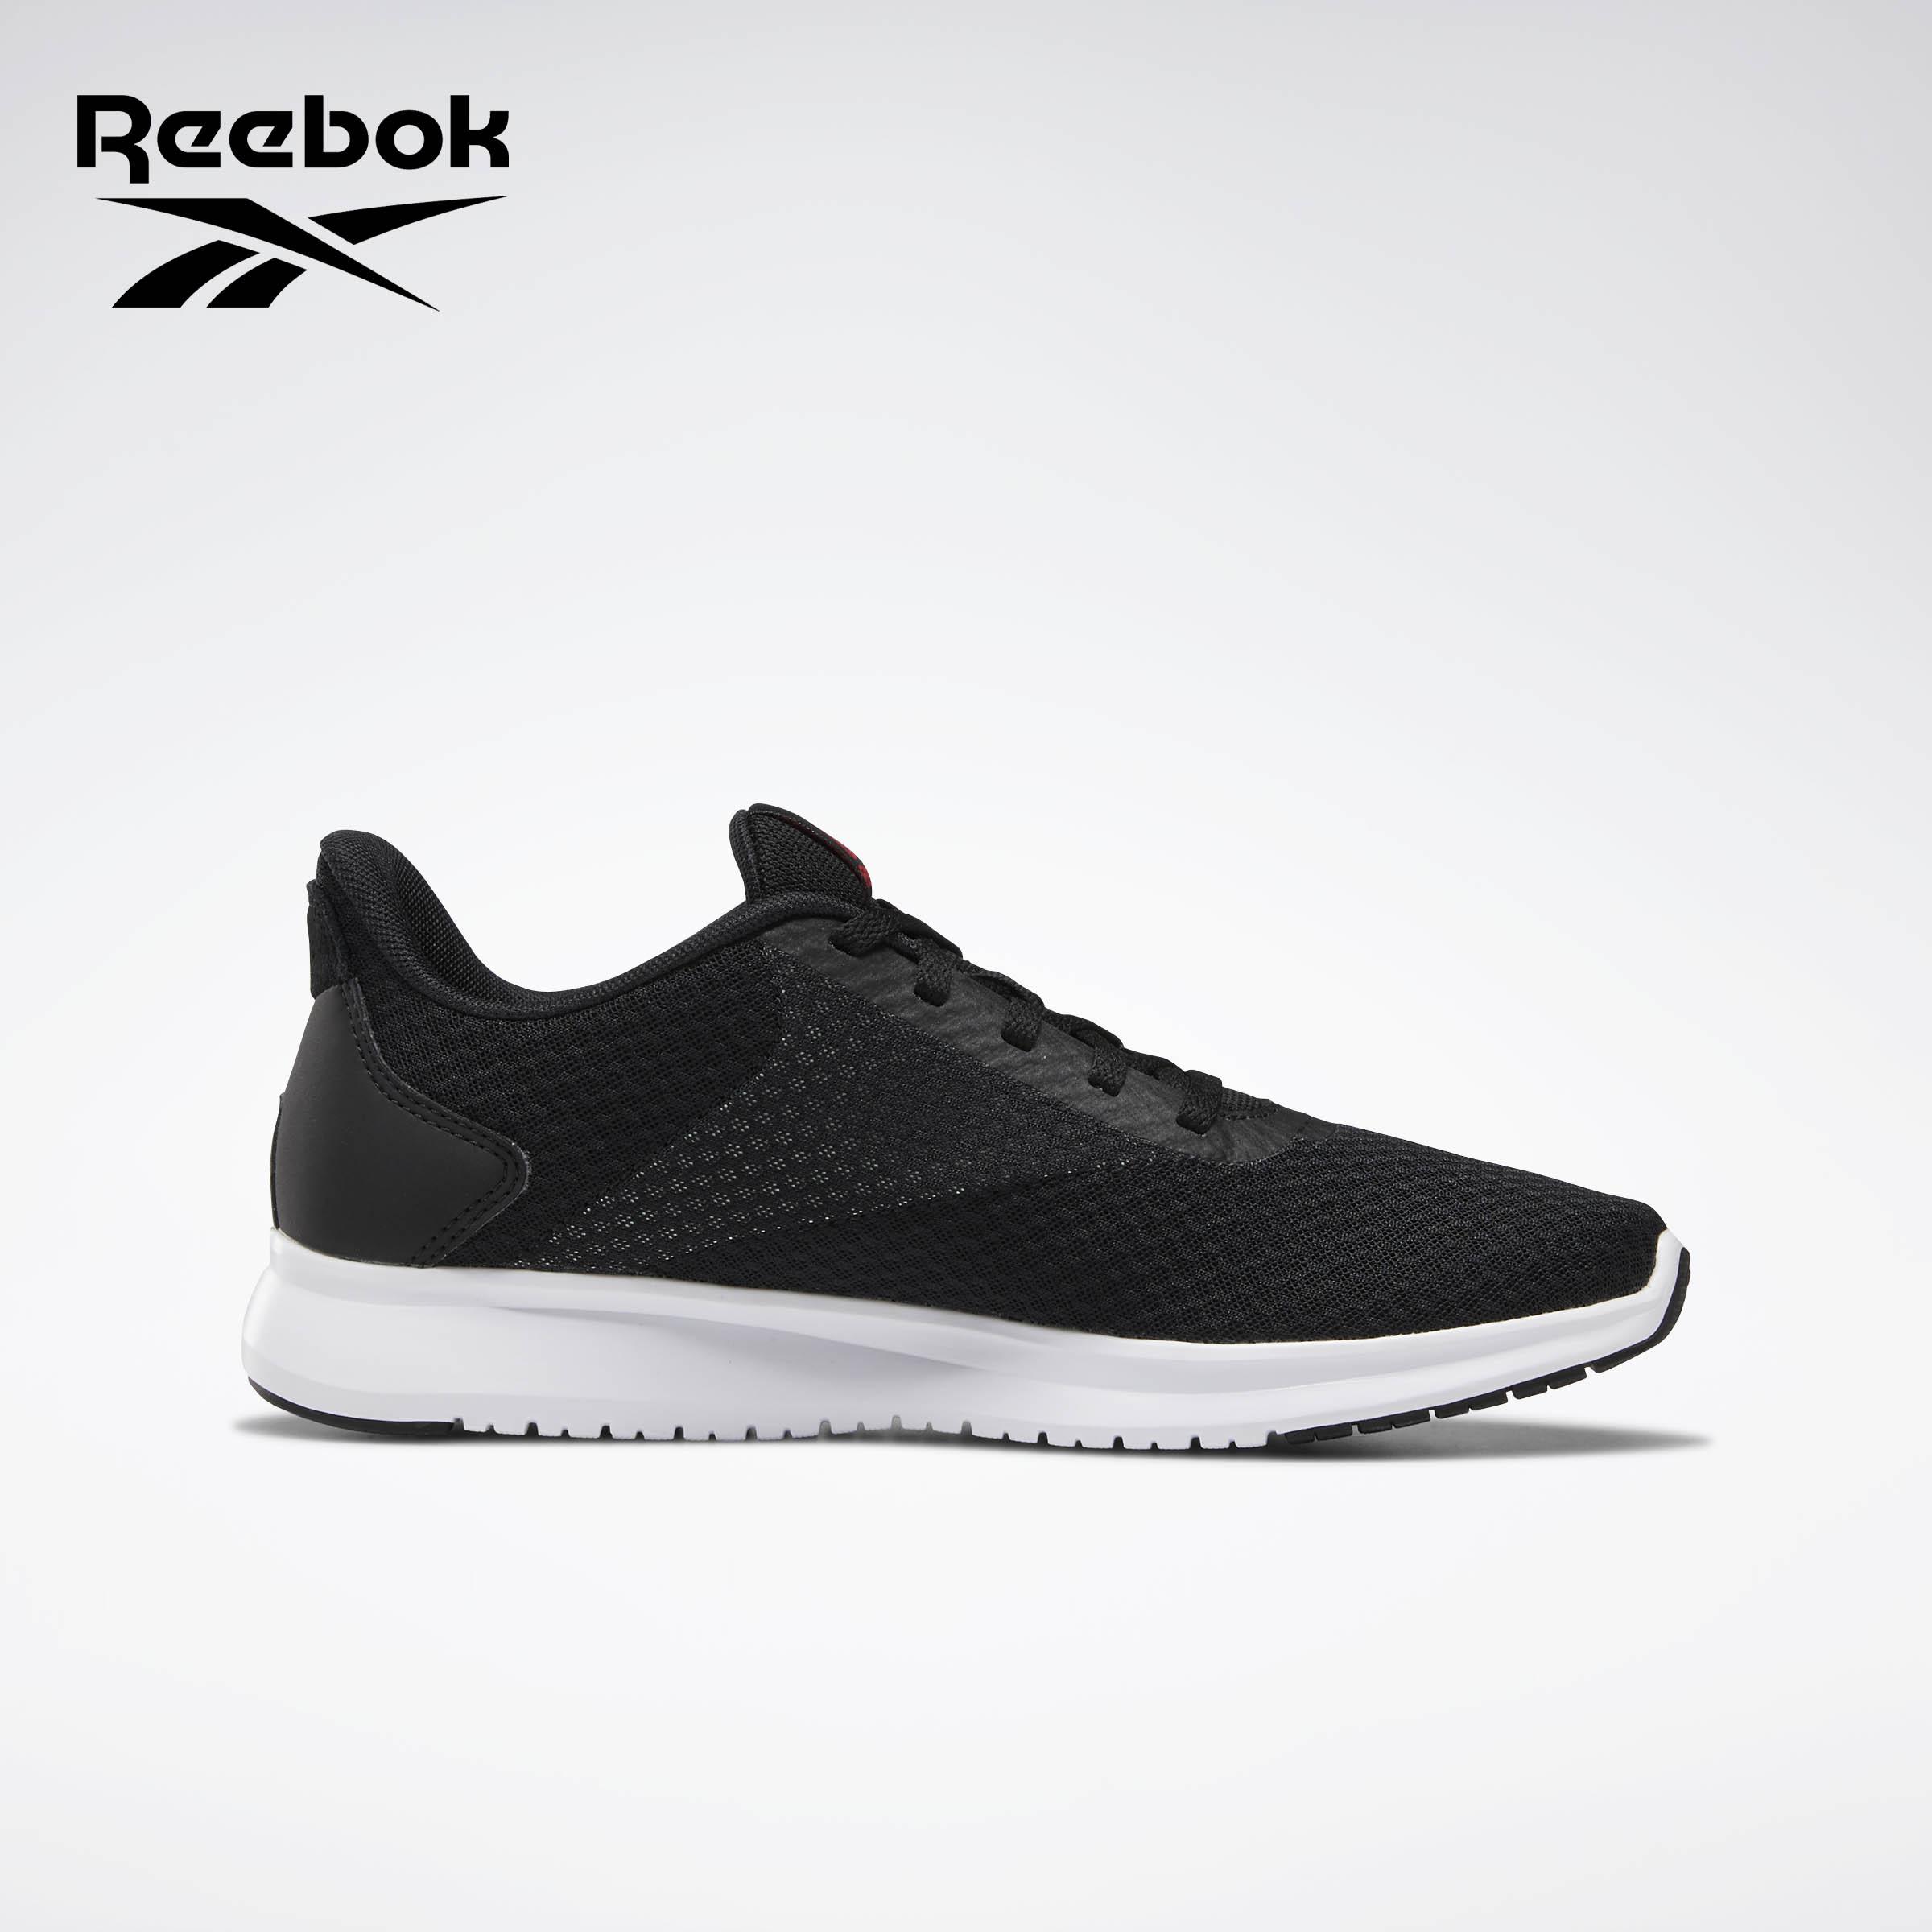 reebok shoes price Online shopping has 